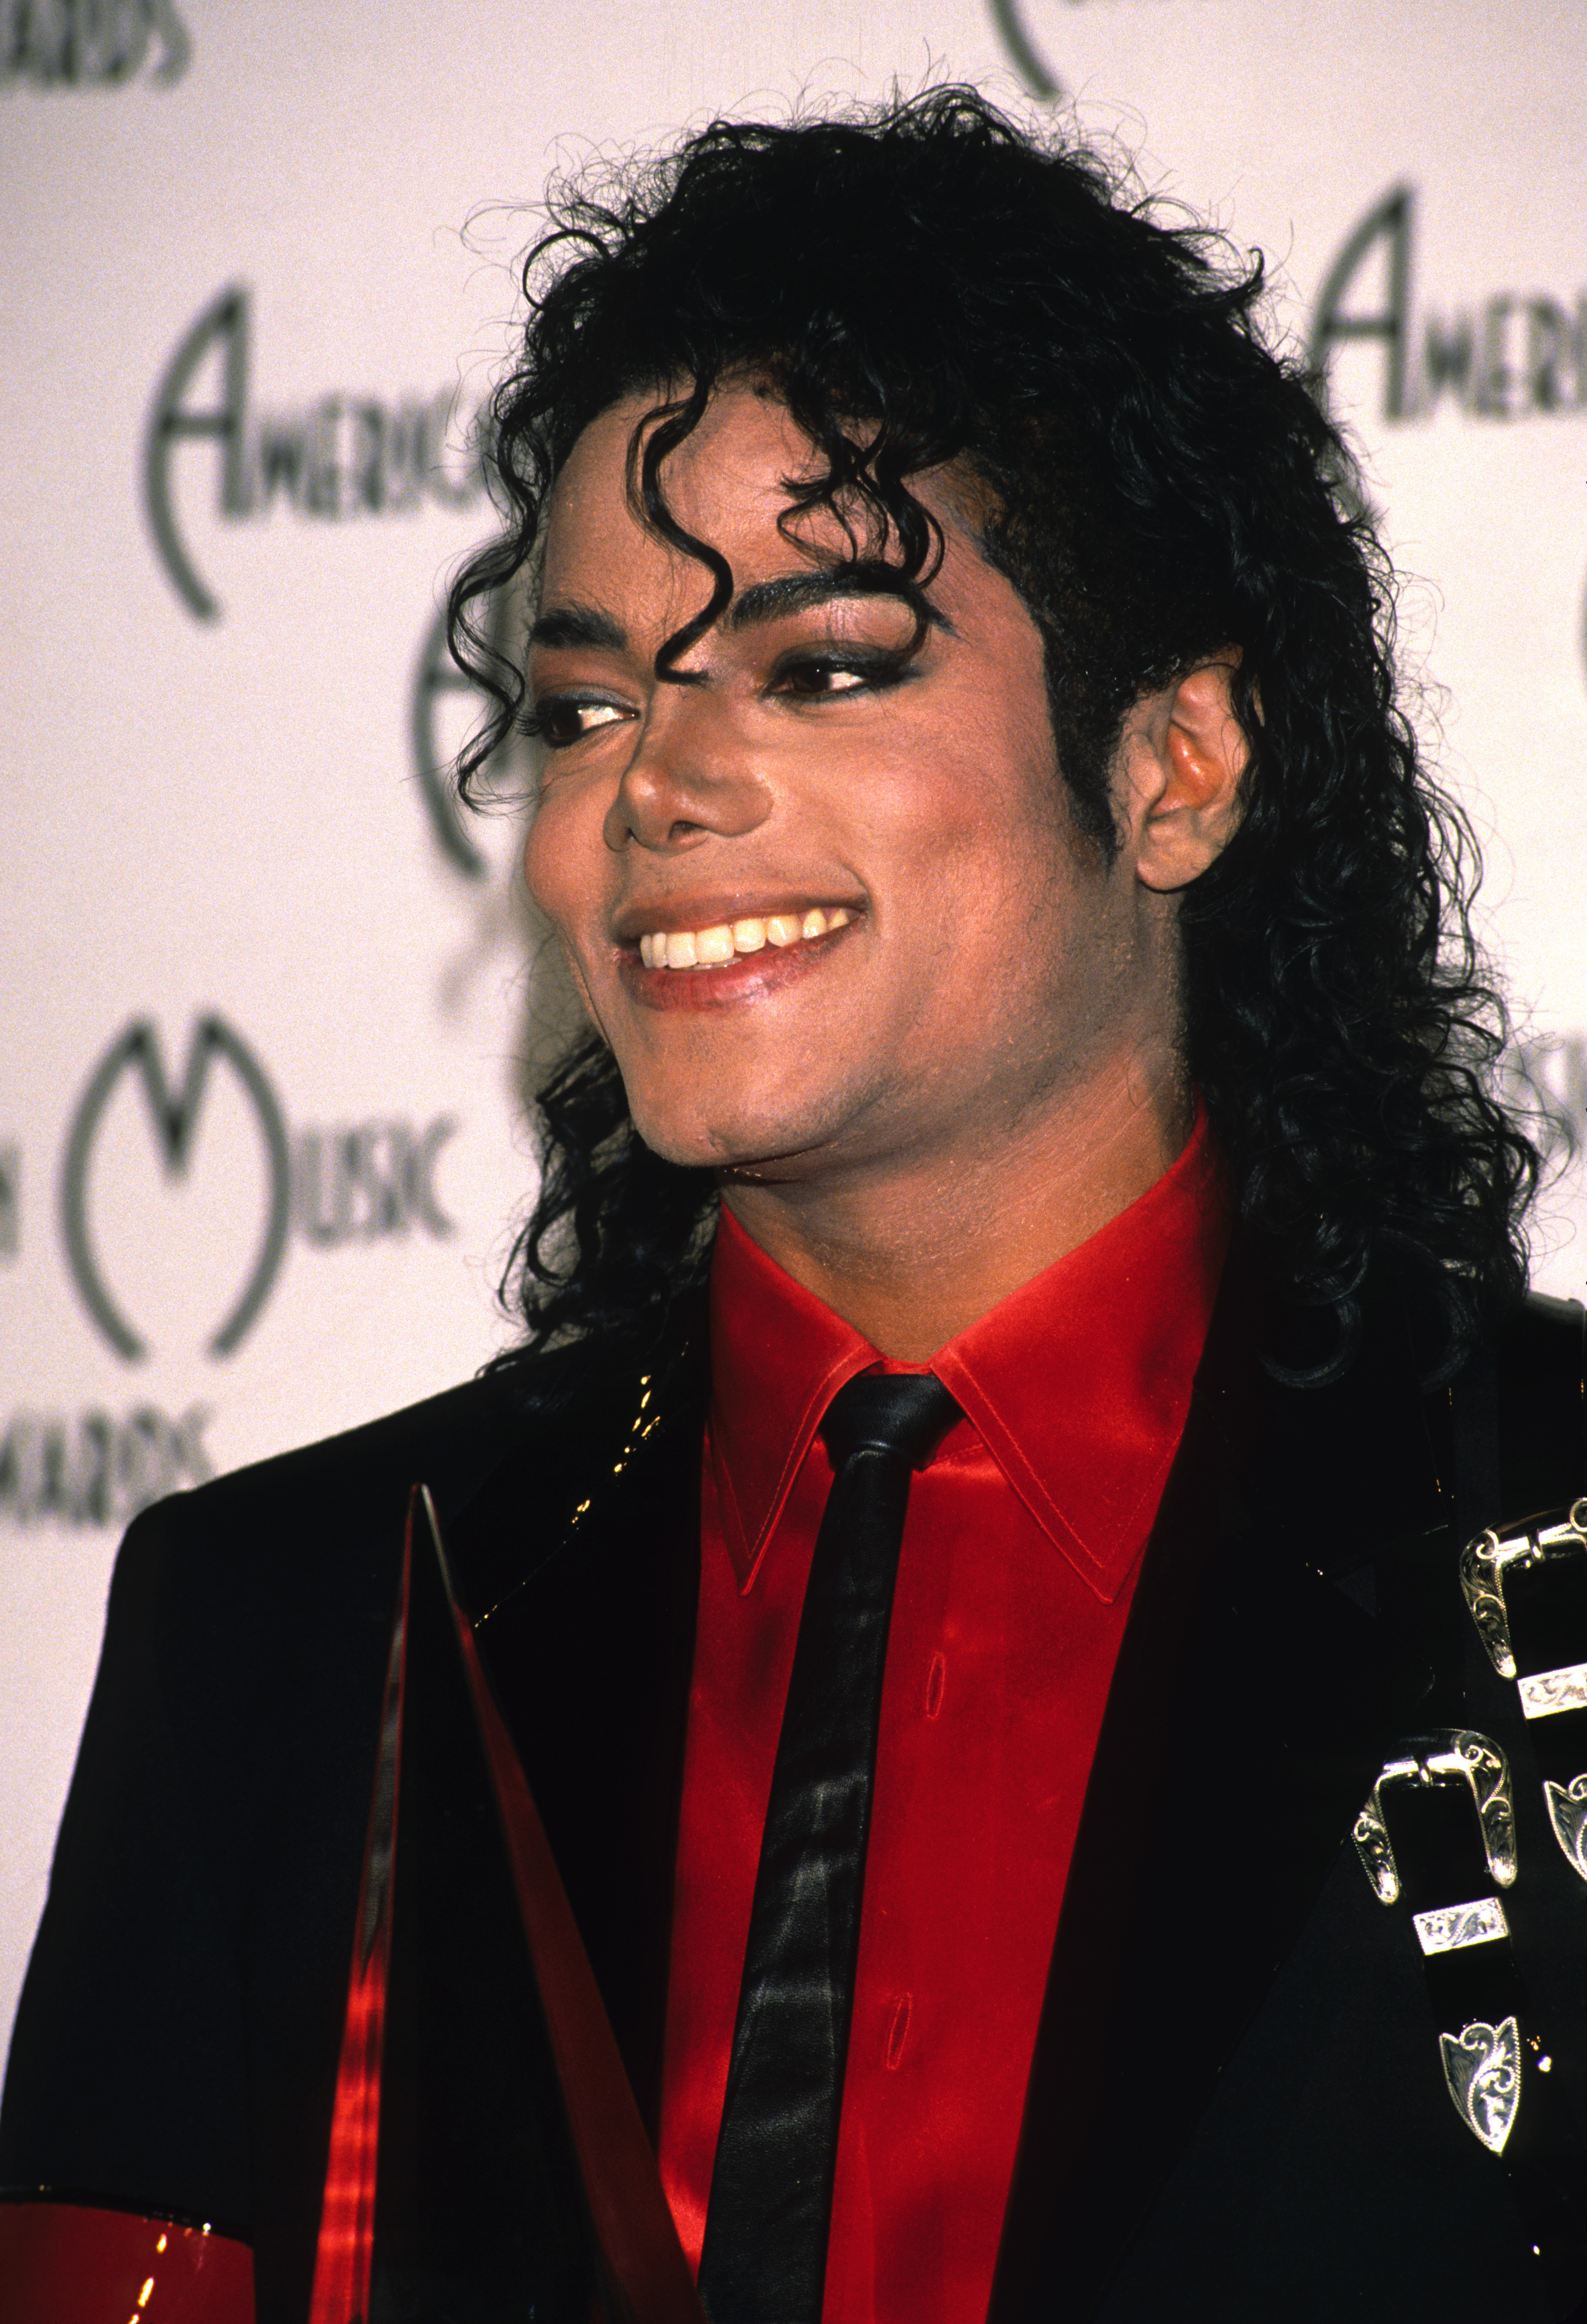 Michael Jackson at the 16th Annual American Music Awards at the Shrine Auditorium in Los Angeles, California on January 30, 1989. | Source: Getty Images